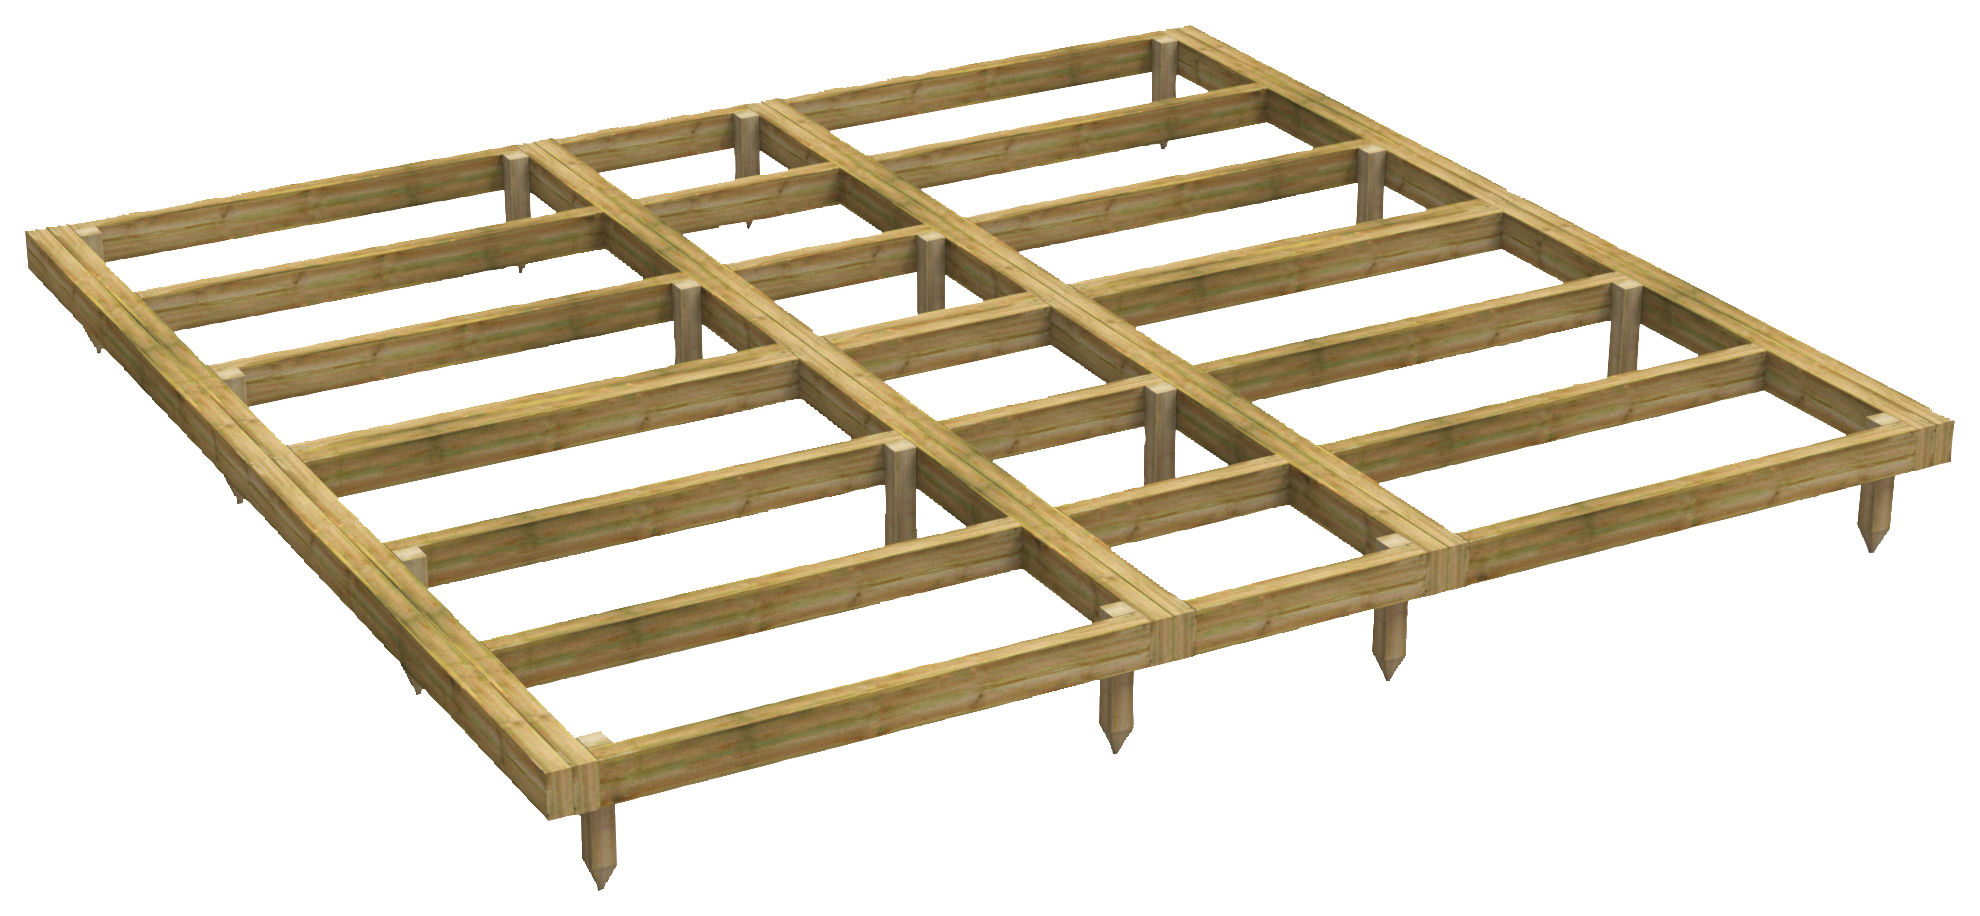 Power Sheds Pressure Treated Garden Building Base Kit - 10 x 10ft